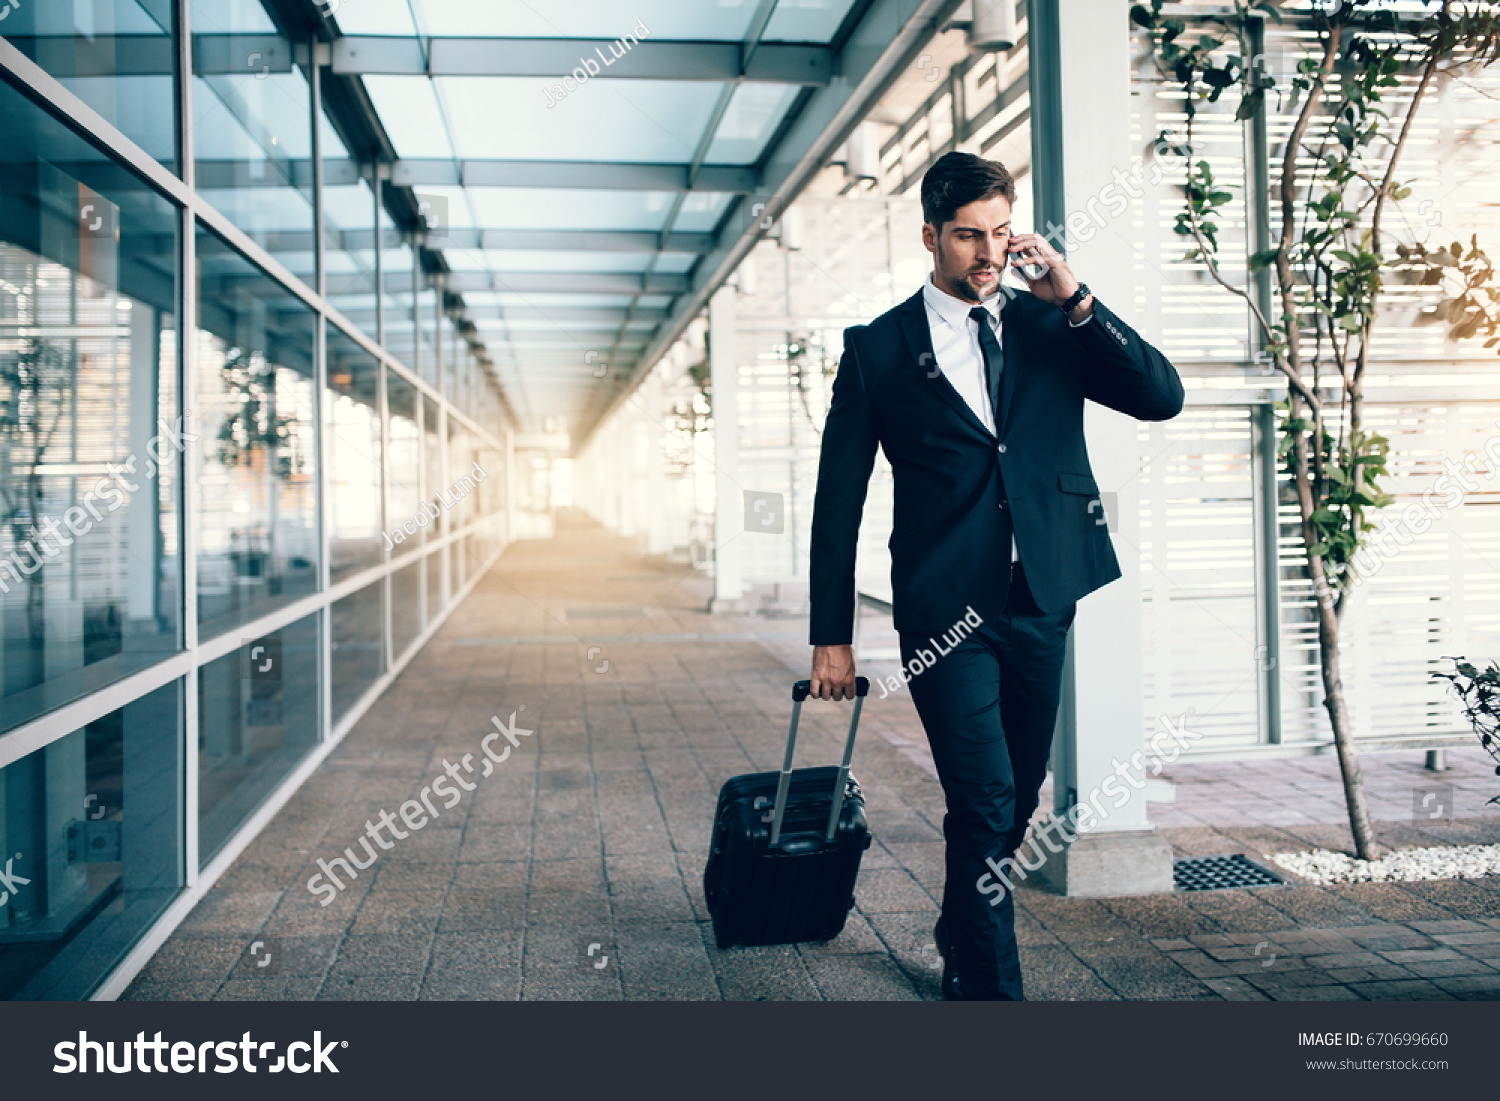 Handsome young man on business trip walking with his luggage and talking on cellphone at airport. Travelling businessman making phone call. #670699660